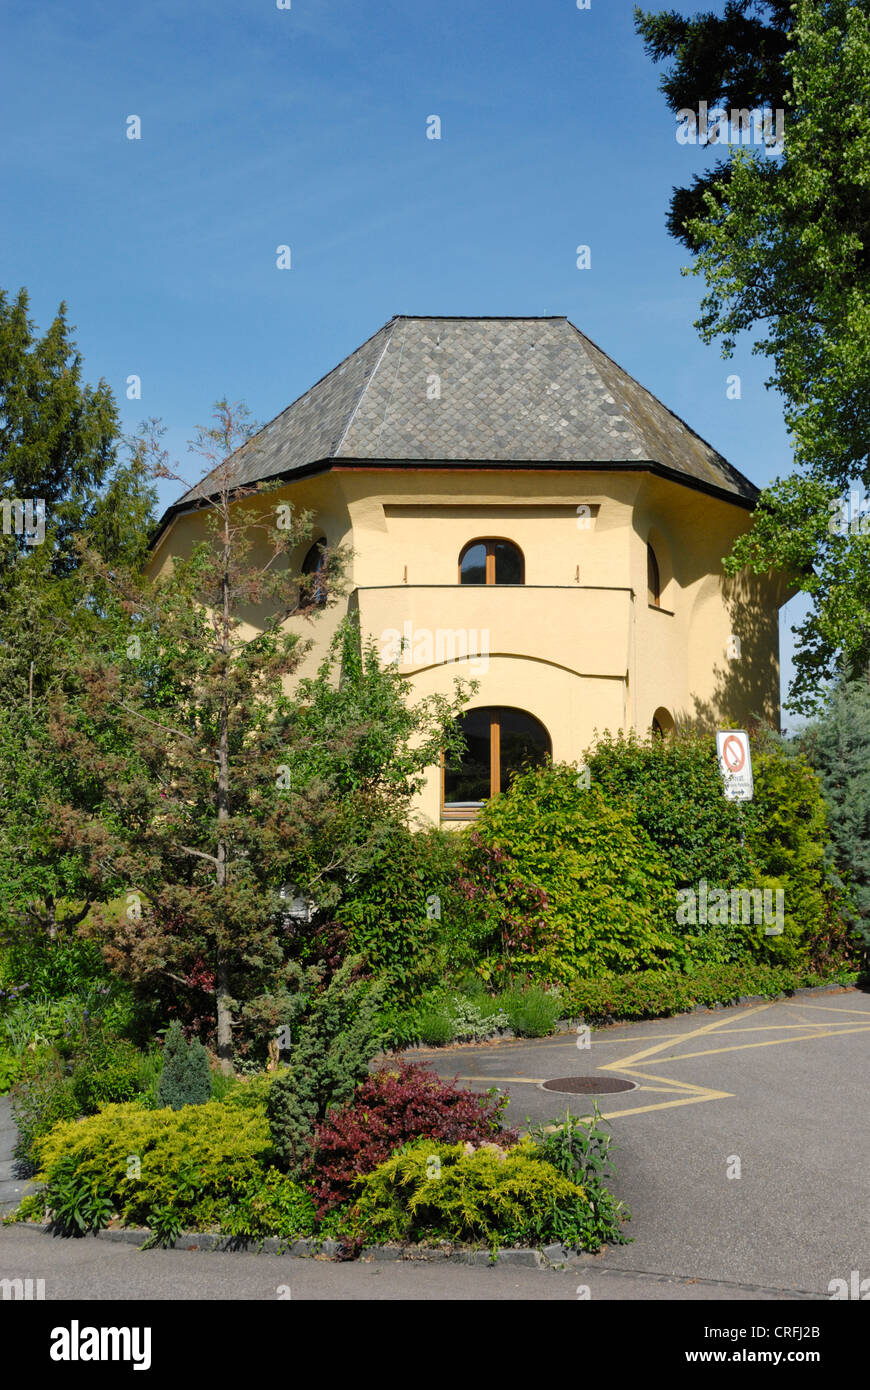 Typical house based on a style created by the philosopher Rudolf Steiner, Dornach near Basel, Switzerland Stock Photo